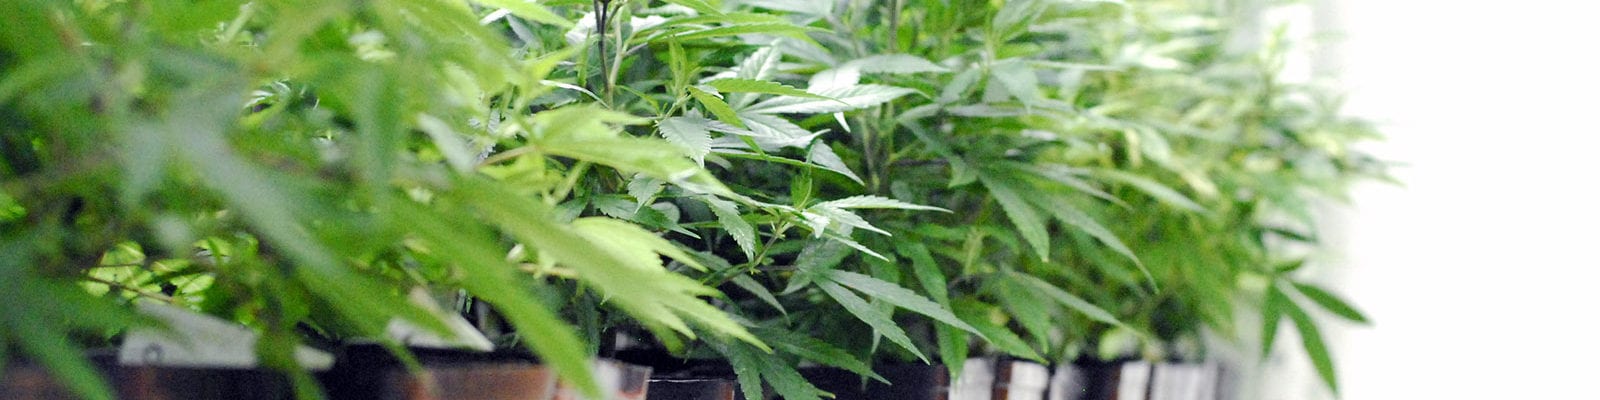 A line of cloned cannabis plants inside of a licensed Washington grow facility.